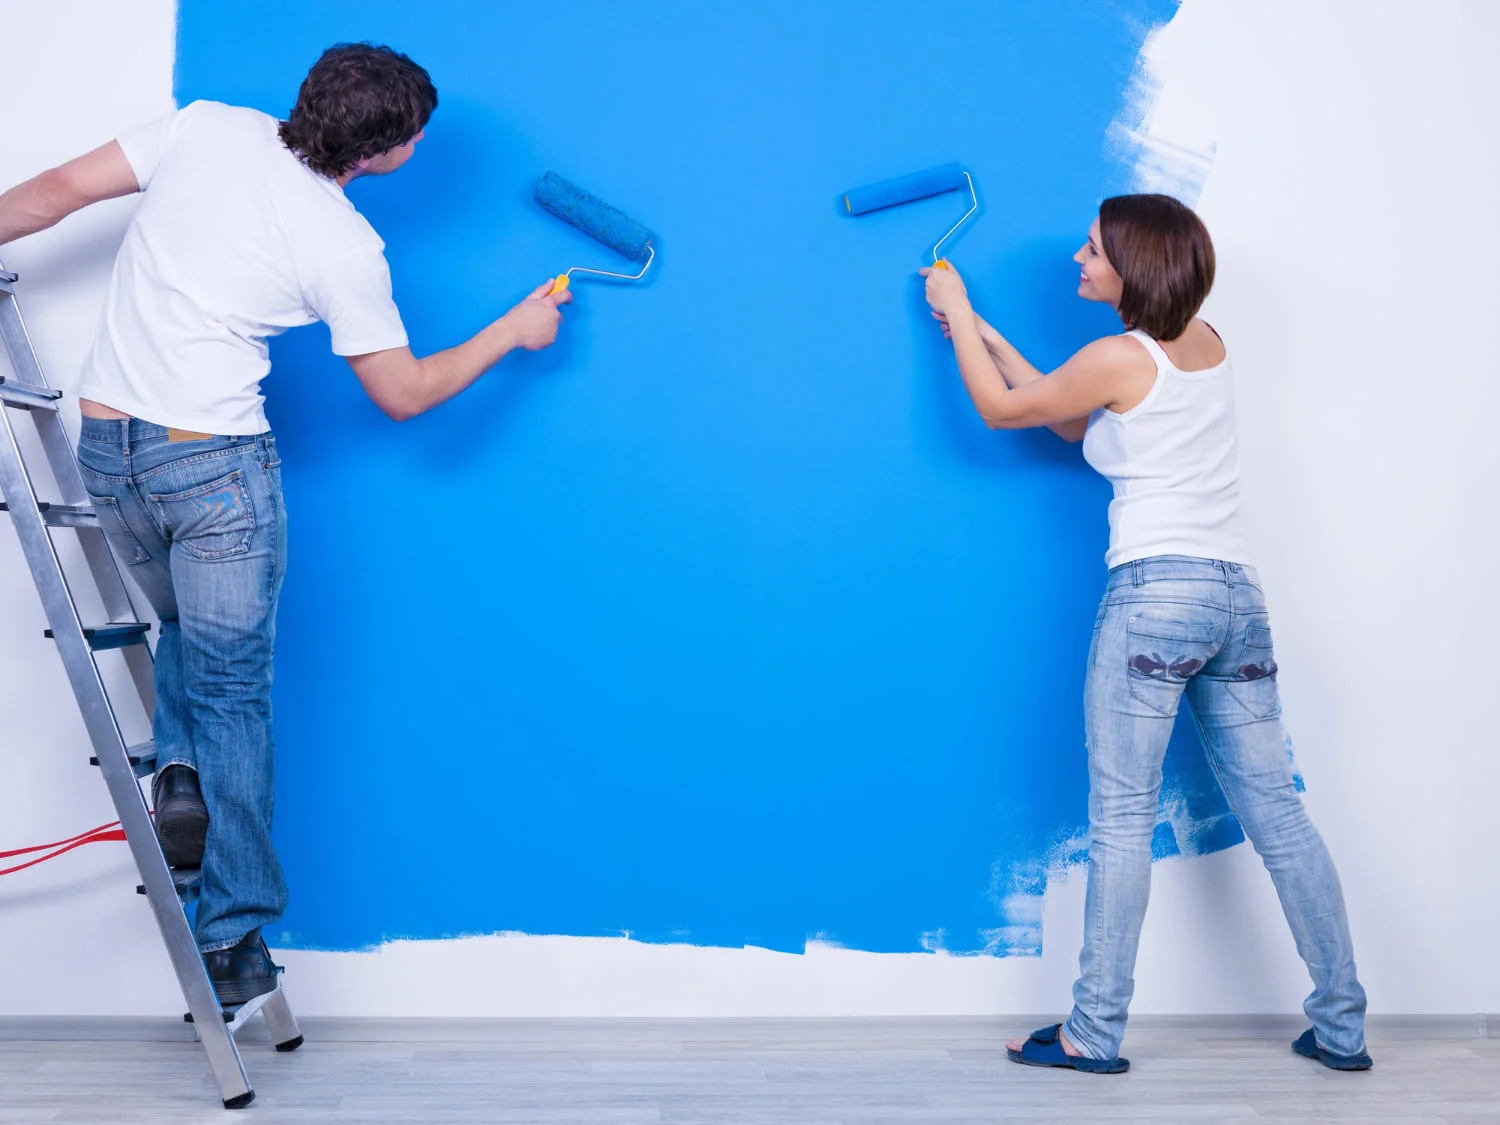 10 Modern Wall Painting Ideas for Home